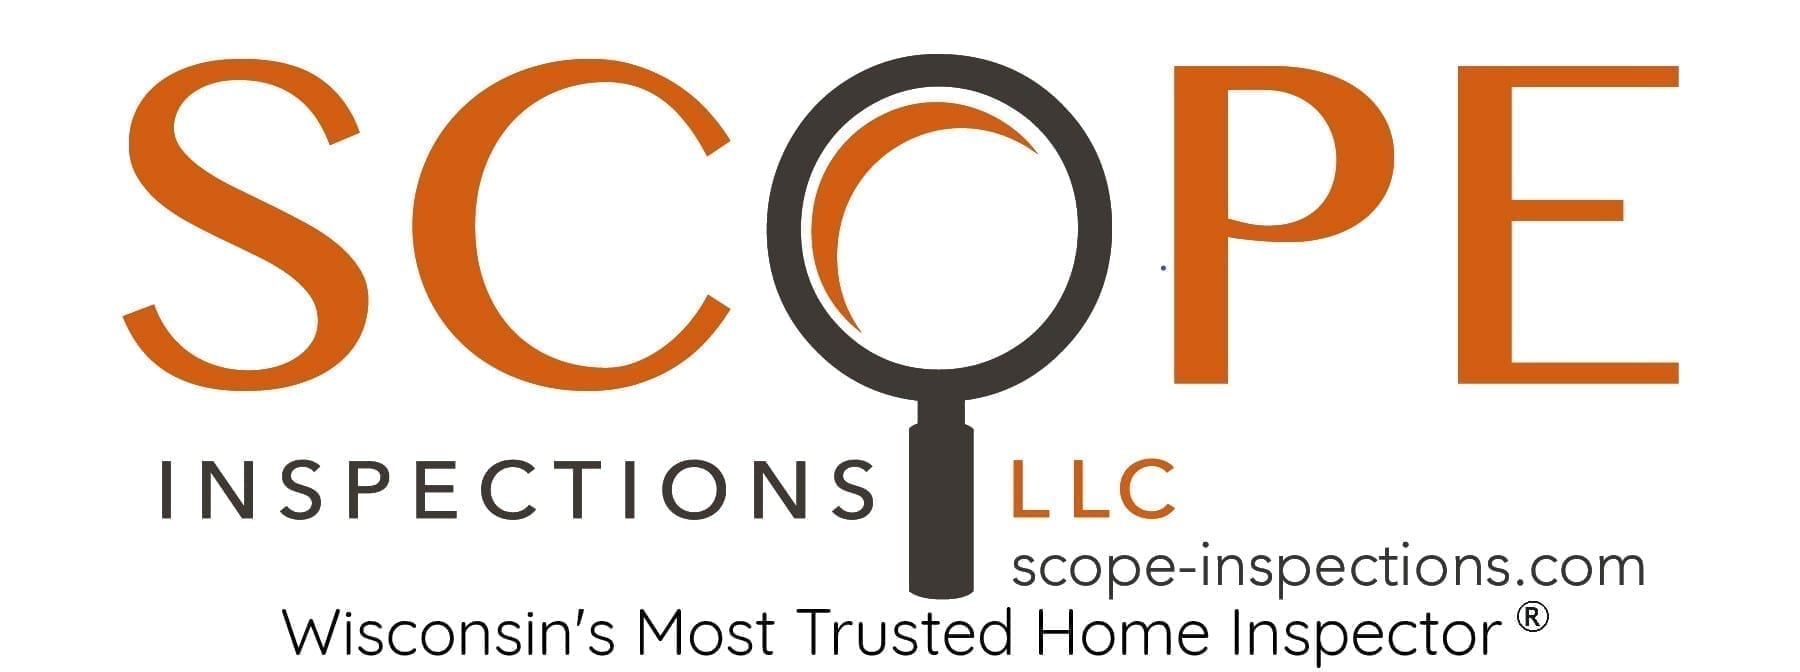 Wisconsin's most trusted Home Inspector